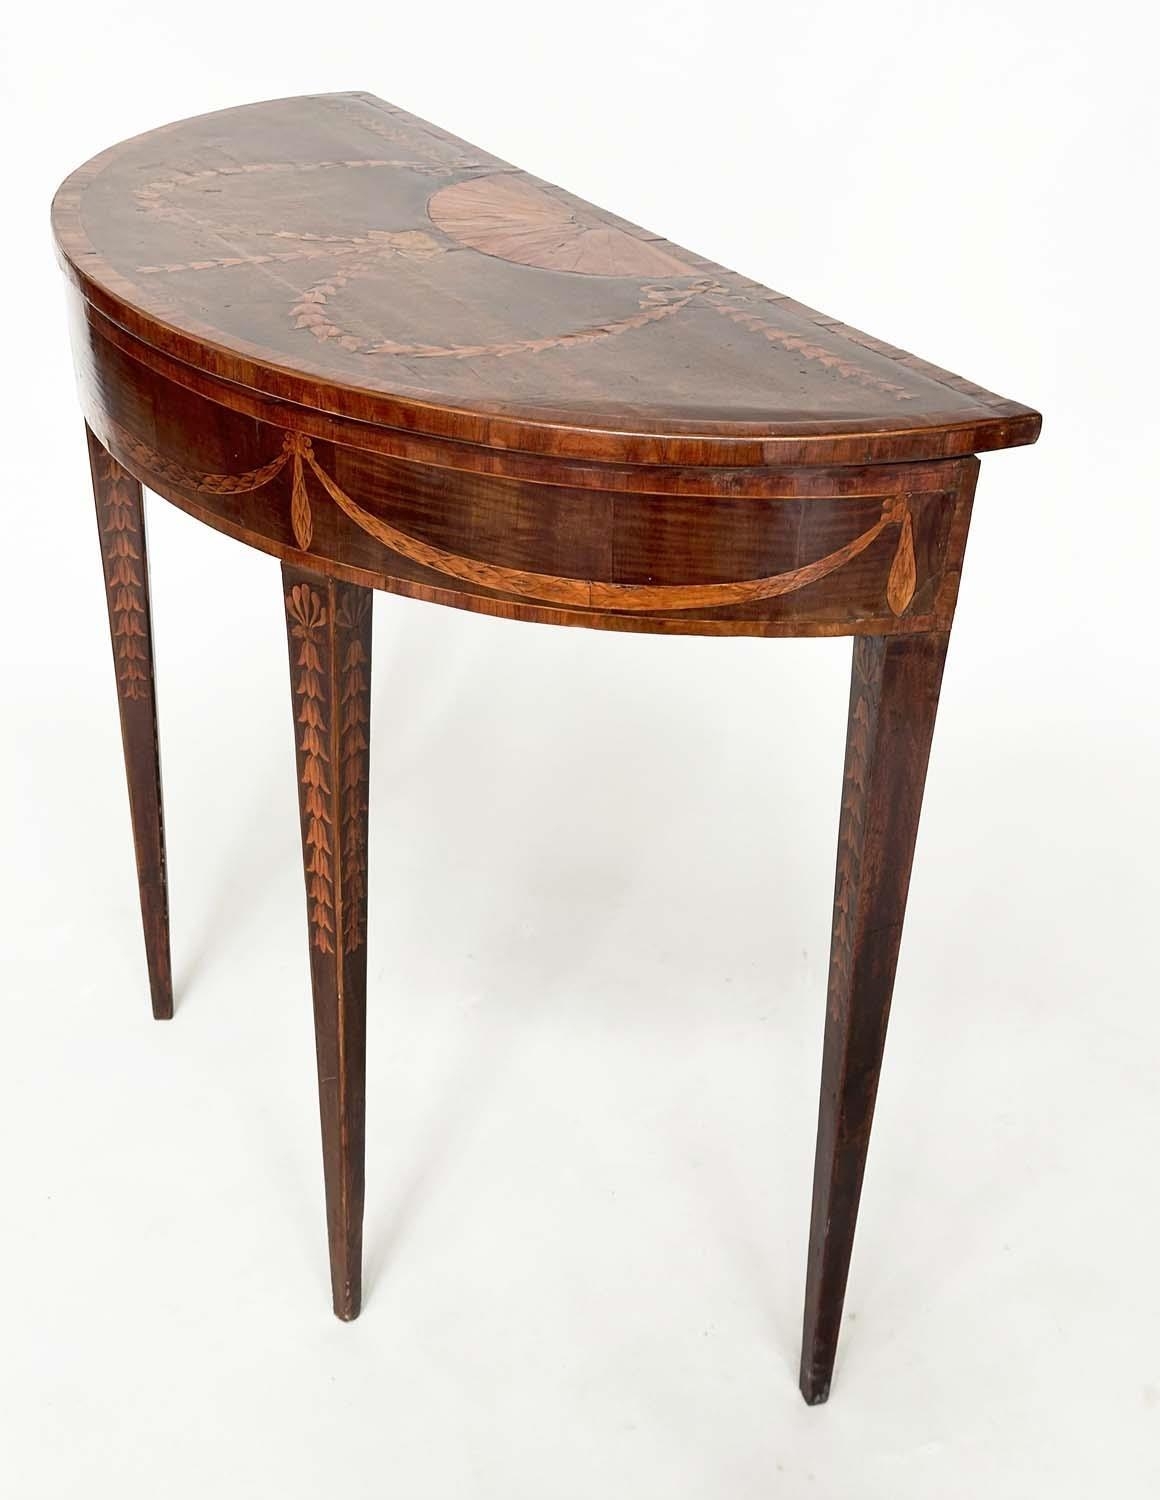 DEMI LUNE SIDE TABLE, George III, probably Irish, fiddle back mahogany and satinwood marquetry - Image 2 of 16